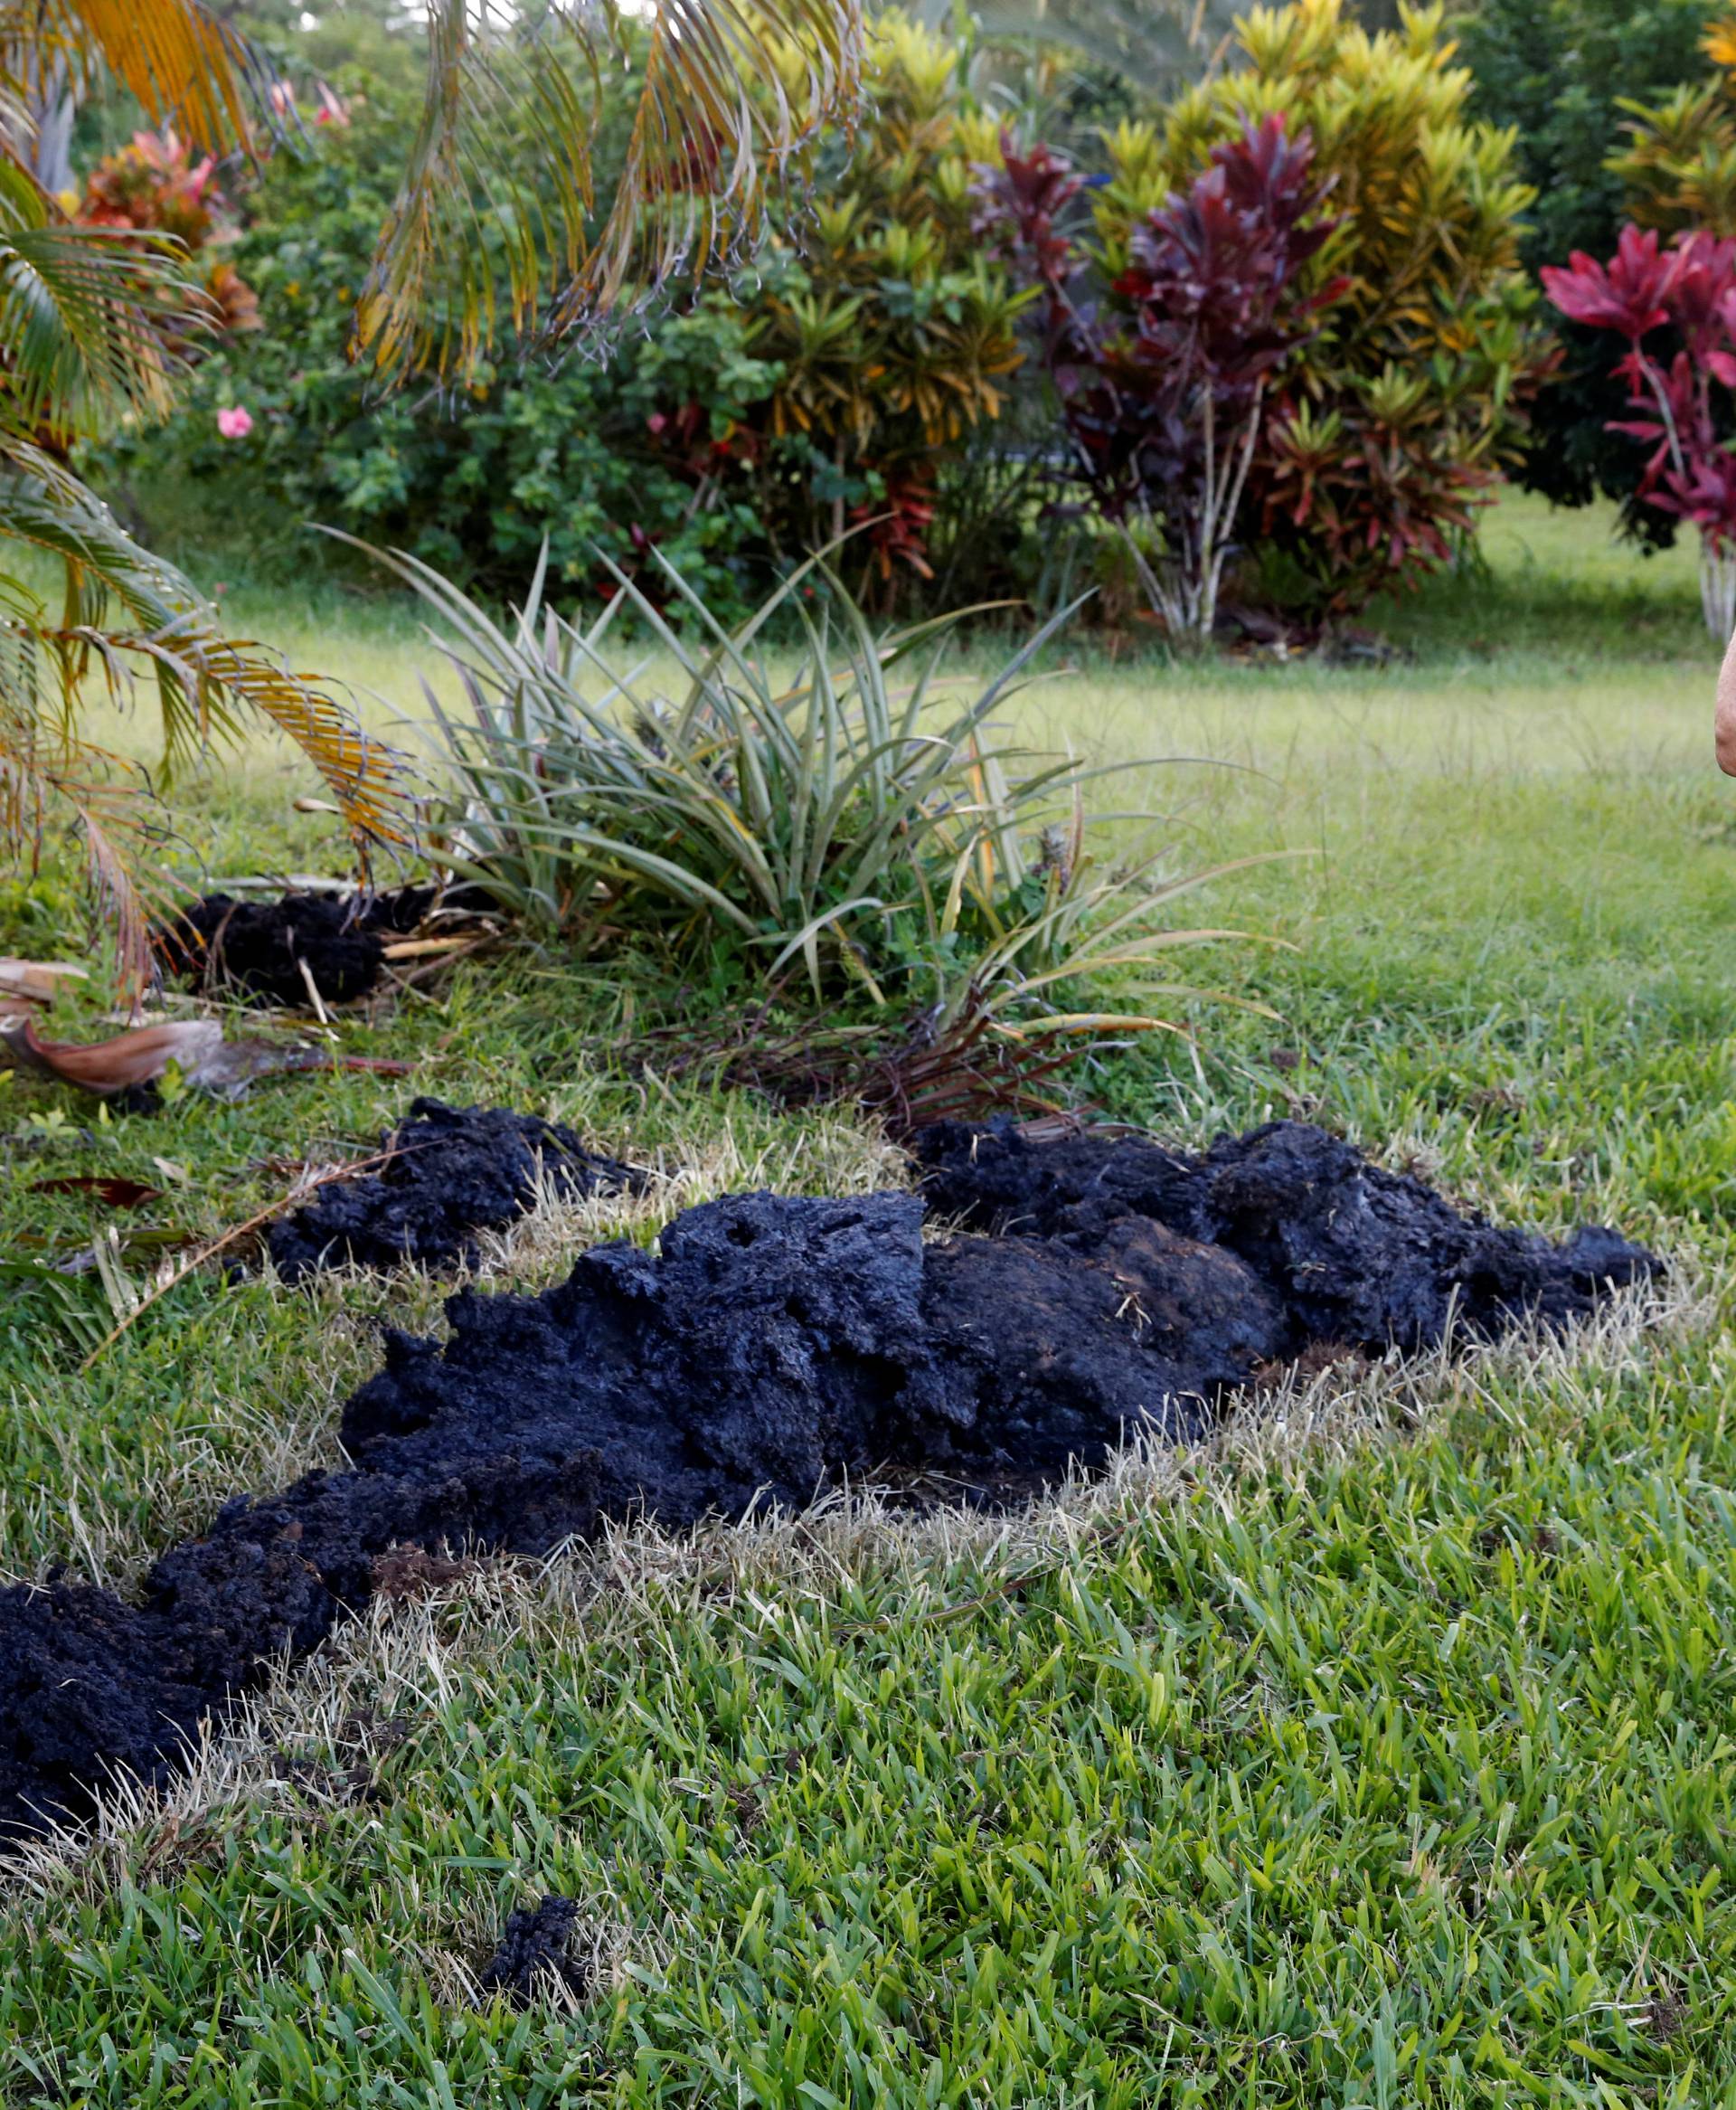 Patricia Spinoza, of Puna, takes a photo of lava on a lawn  on the outskirts of Pahoa